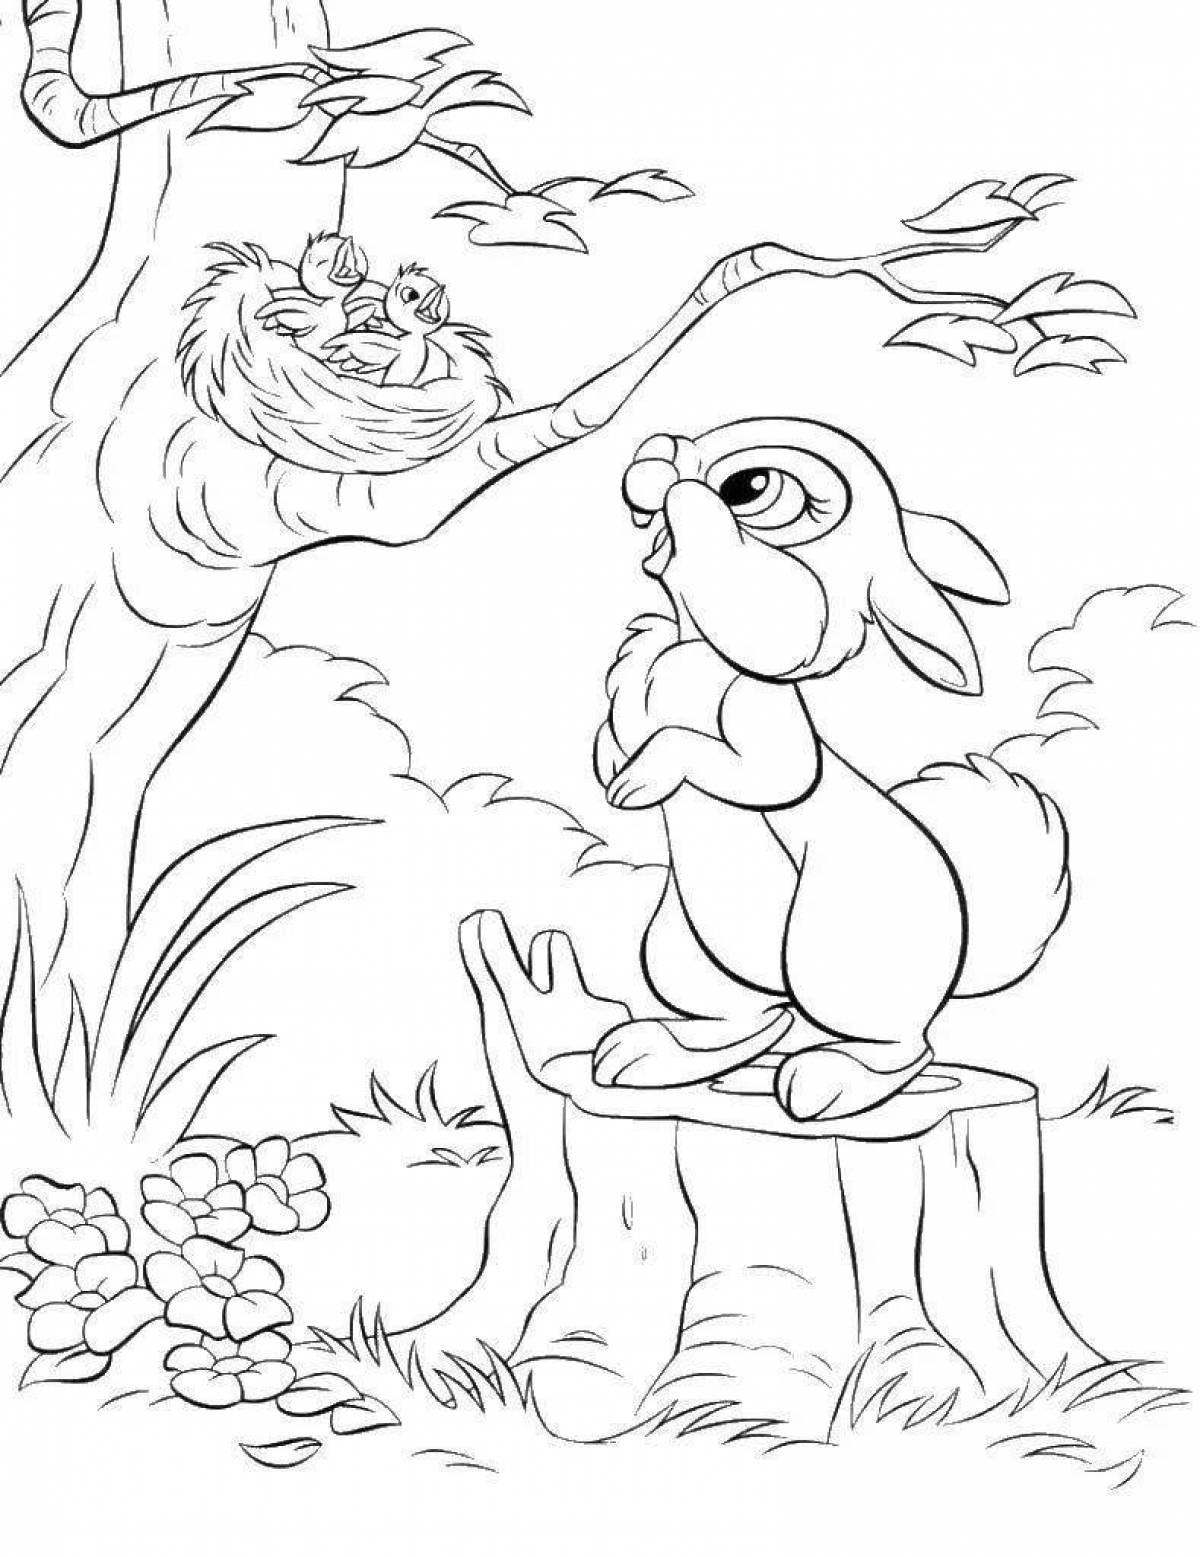 Courageous hare coloring page